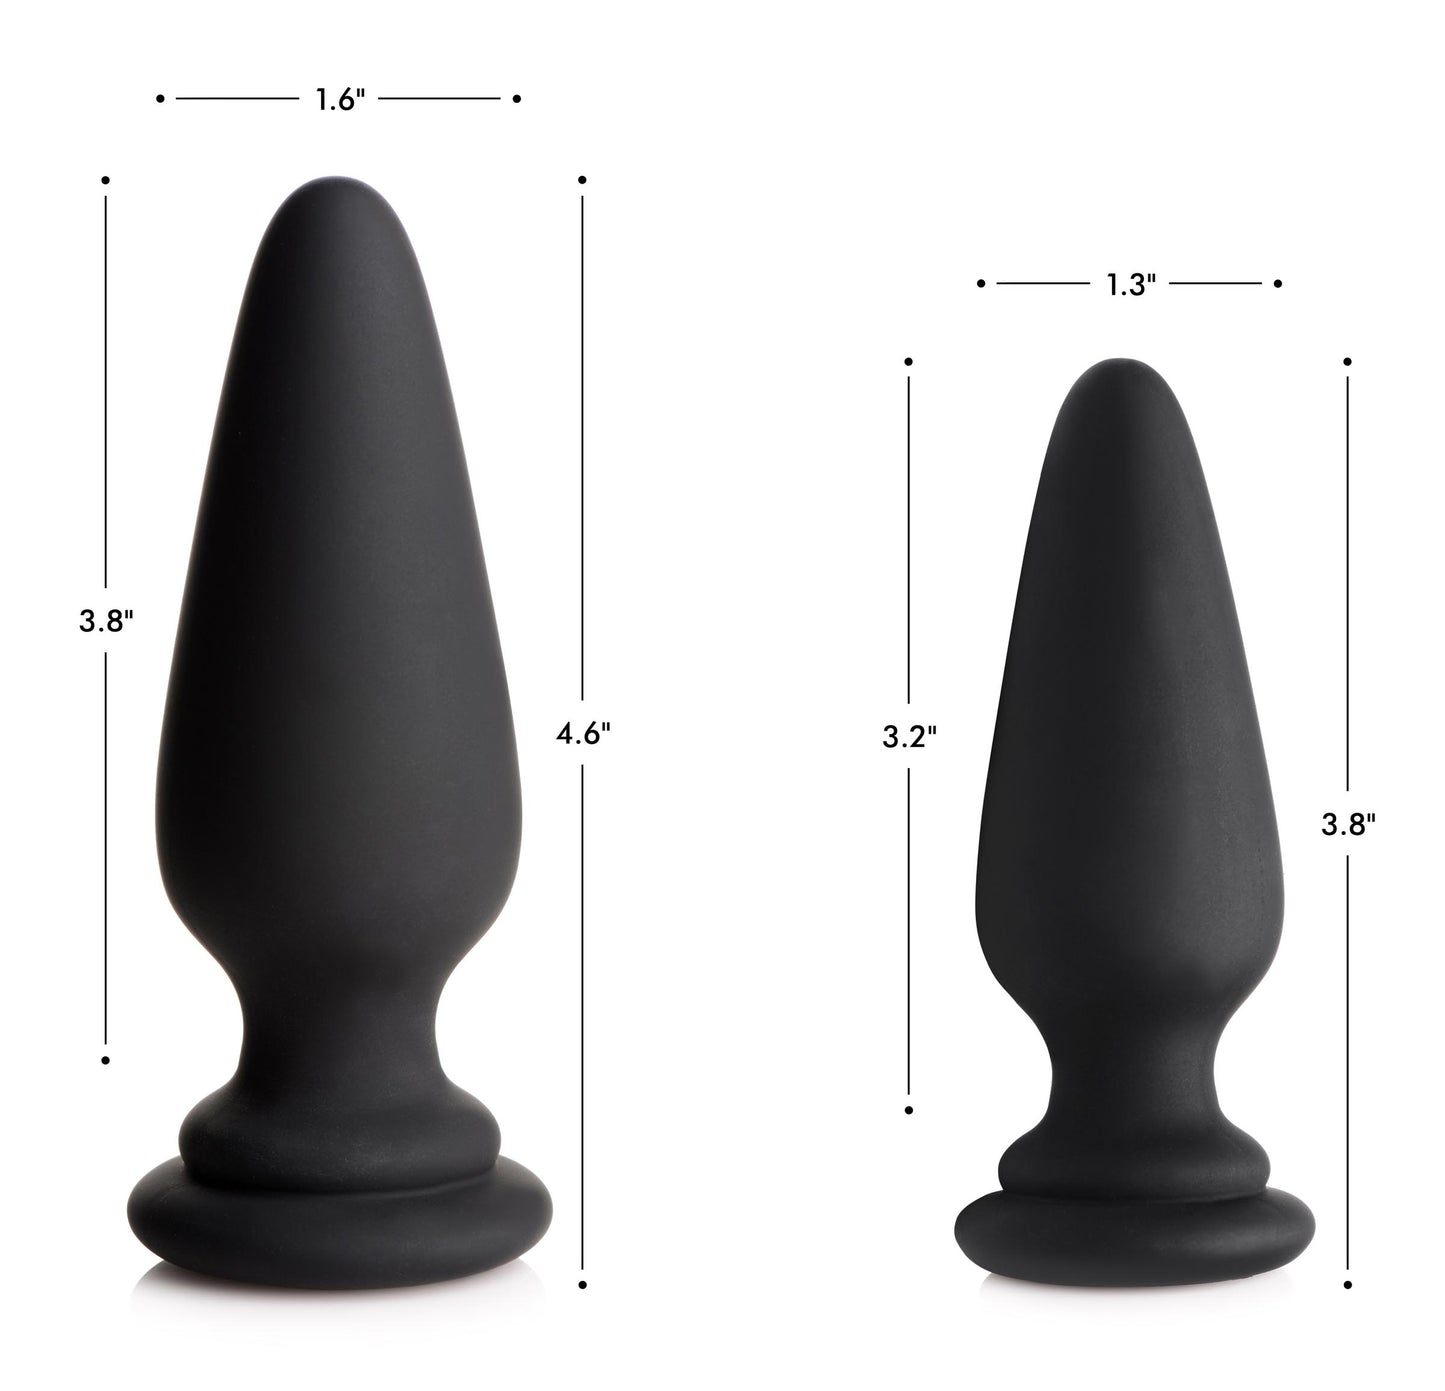 Small Anal Plug with Interchangeable Fox Tail - Black - UABDSM